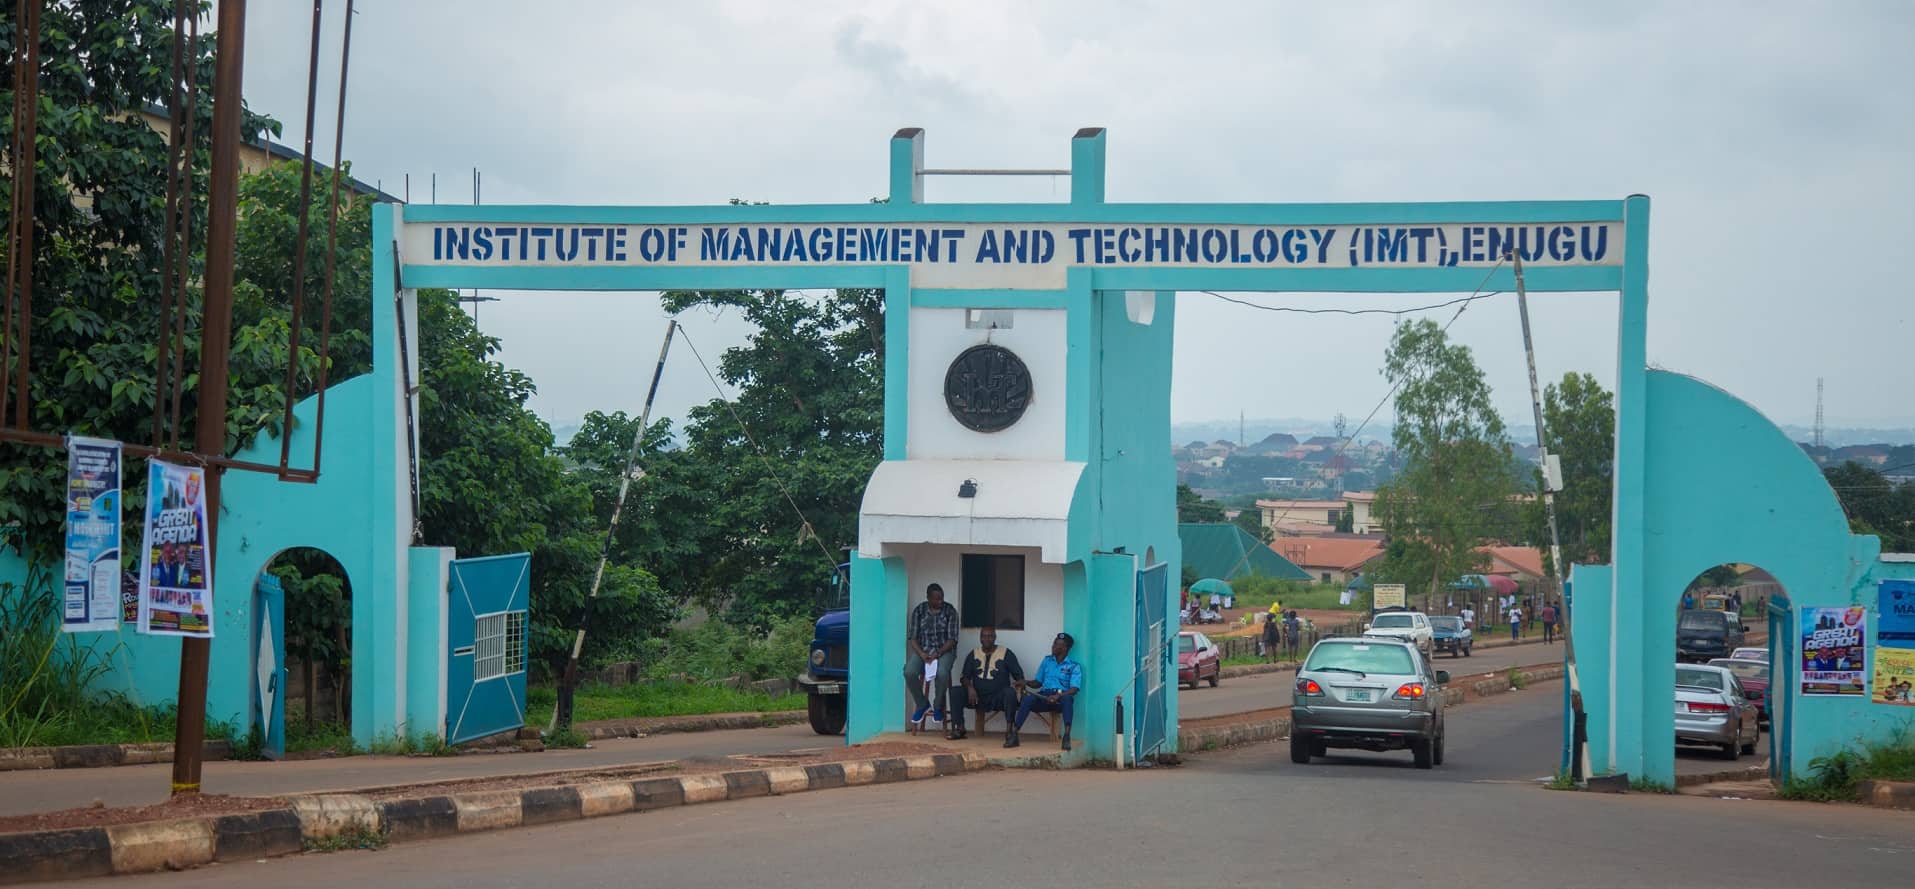 Institute of Management and Technology (IMT) ND Full-Time and Degree Admission Lists for 2022/2023 Academic Session